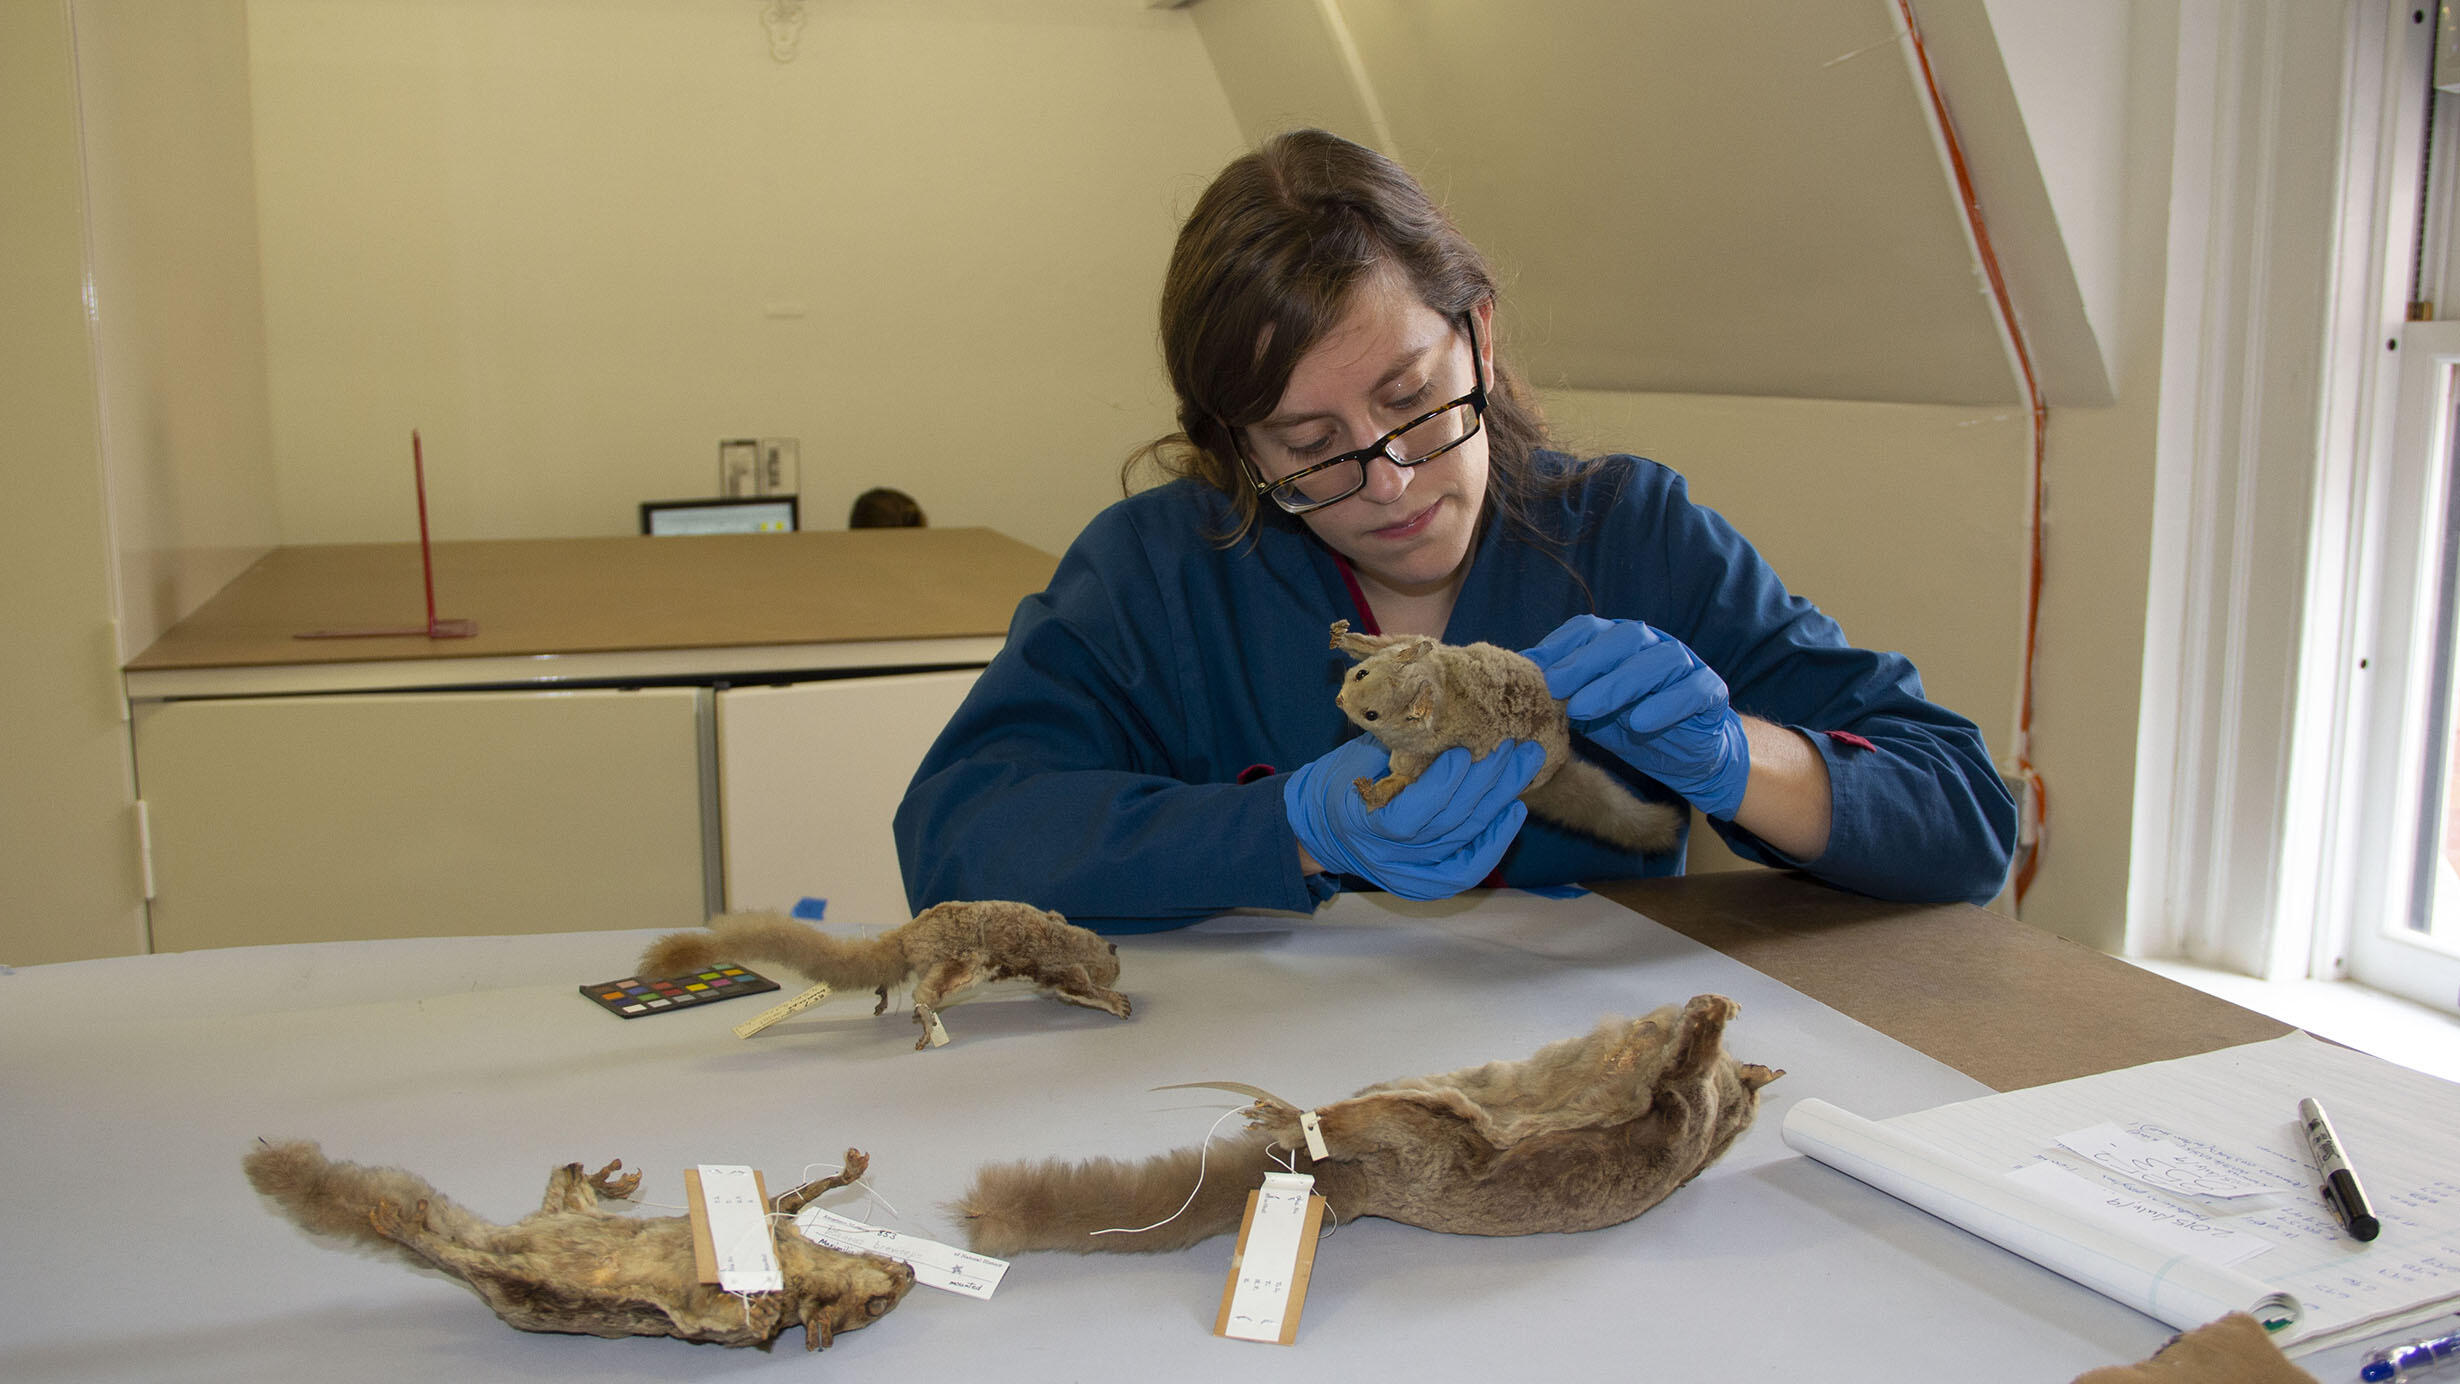 Scientist wearing gloves and seated at a lab table examines the fur or a rodent mammal specimen.